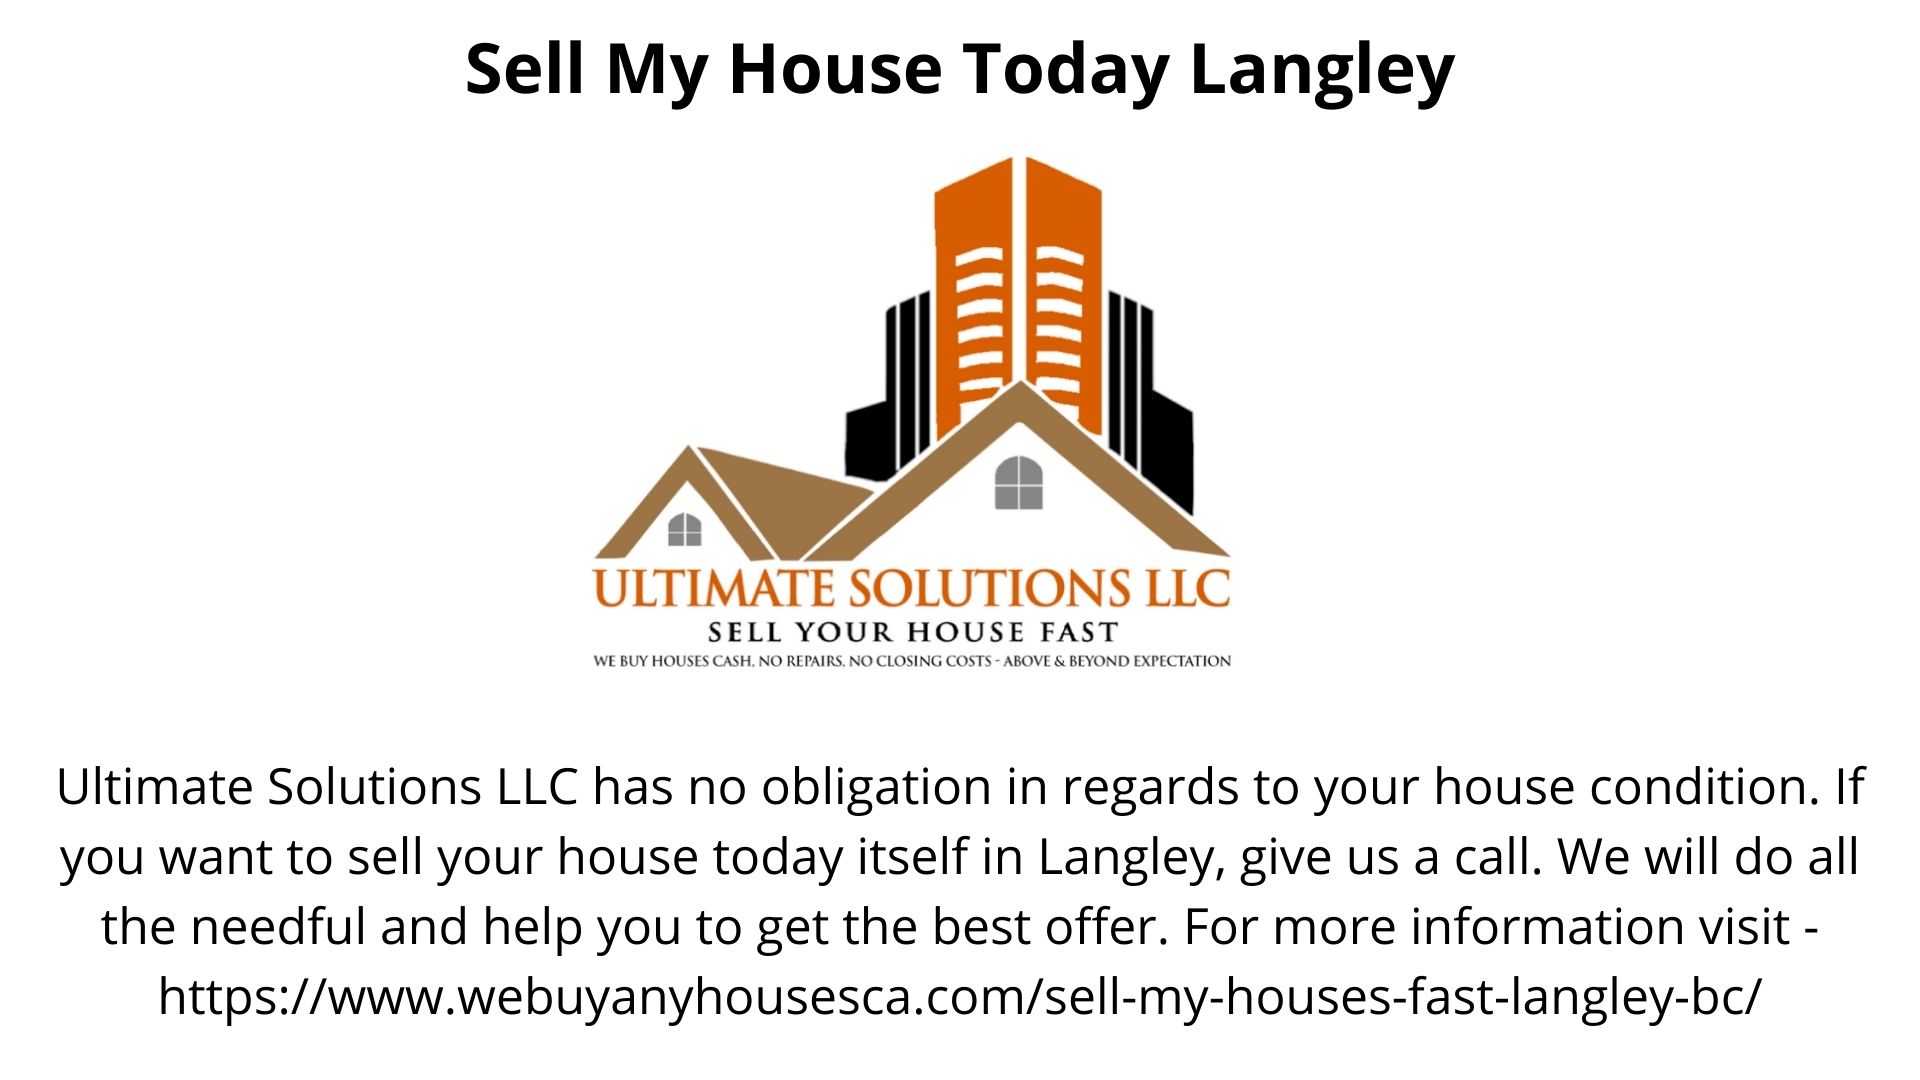 Sell My House Today Langley.jpg  by JackWilson